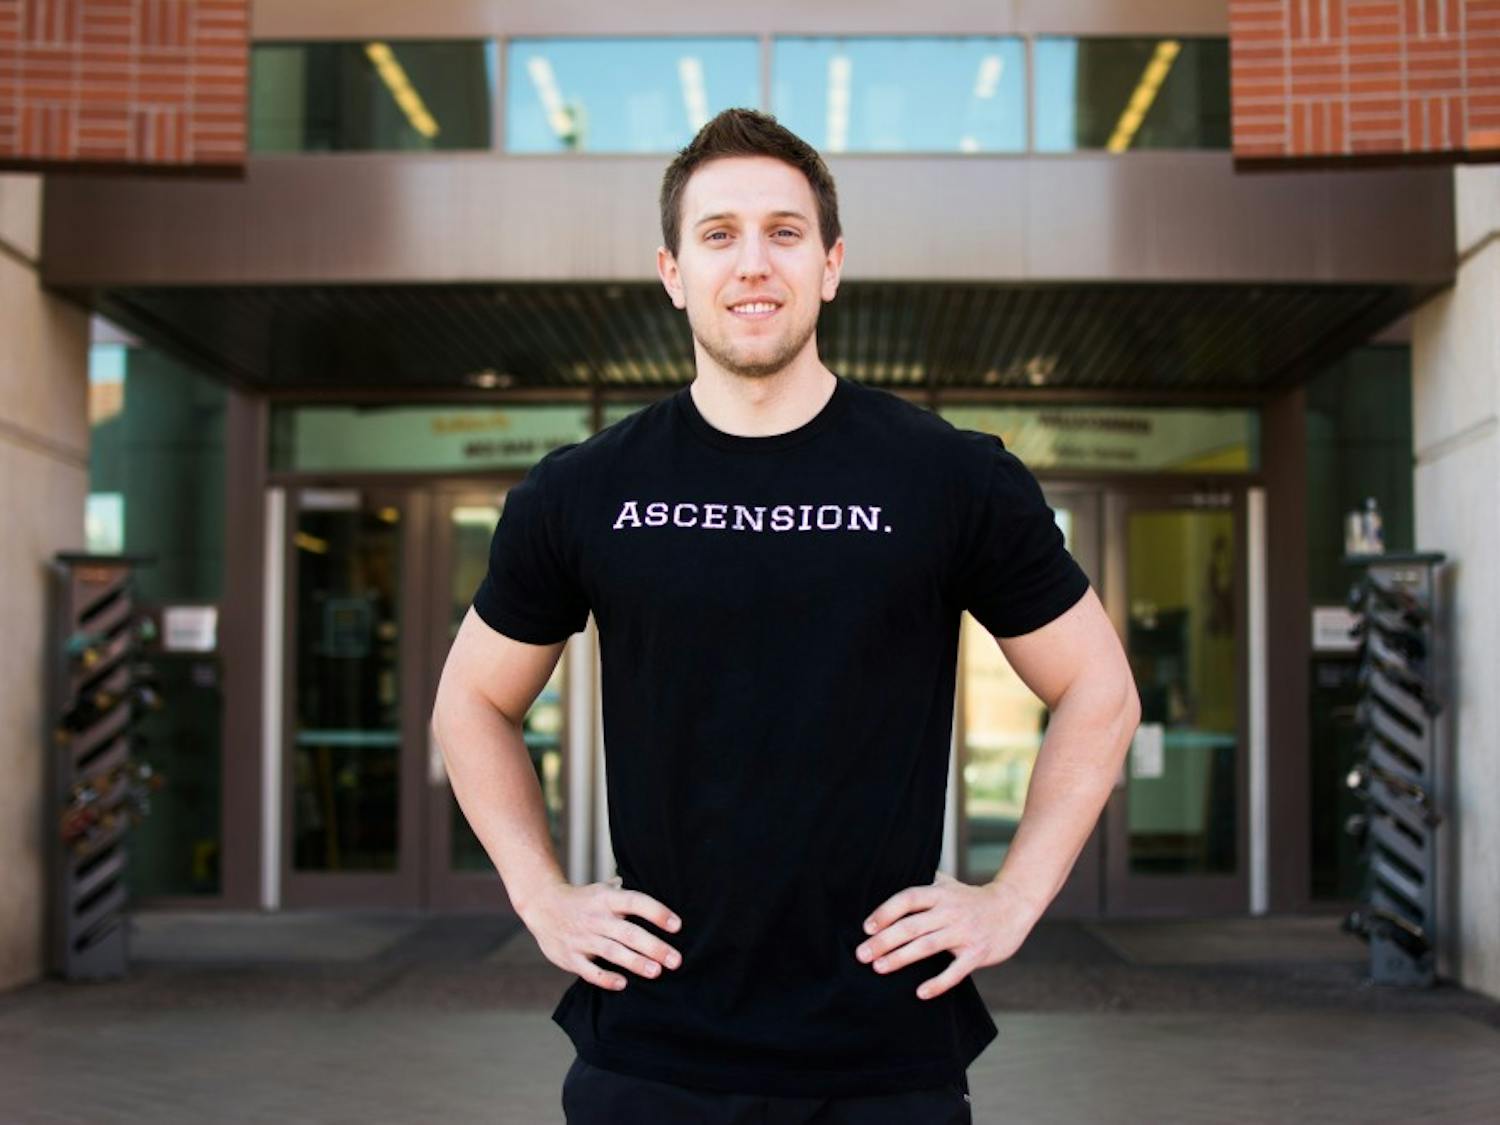 TJ Uli, 21-year-old biochemistry senior at ASU, poses outside of ASU Tempe’s Sun Devil Fitness Complex on Jan. 18, 2017. Uli sports a t-shirt from his recently launched apparel line “Ascension. Athletic Apparel and Lifestyle”. 